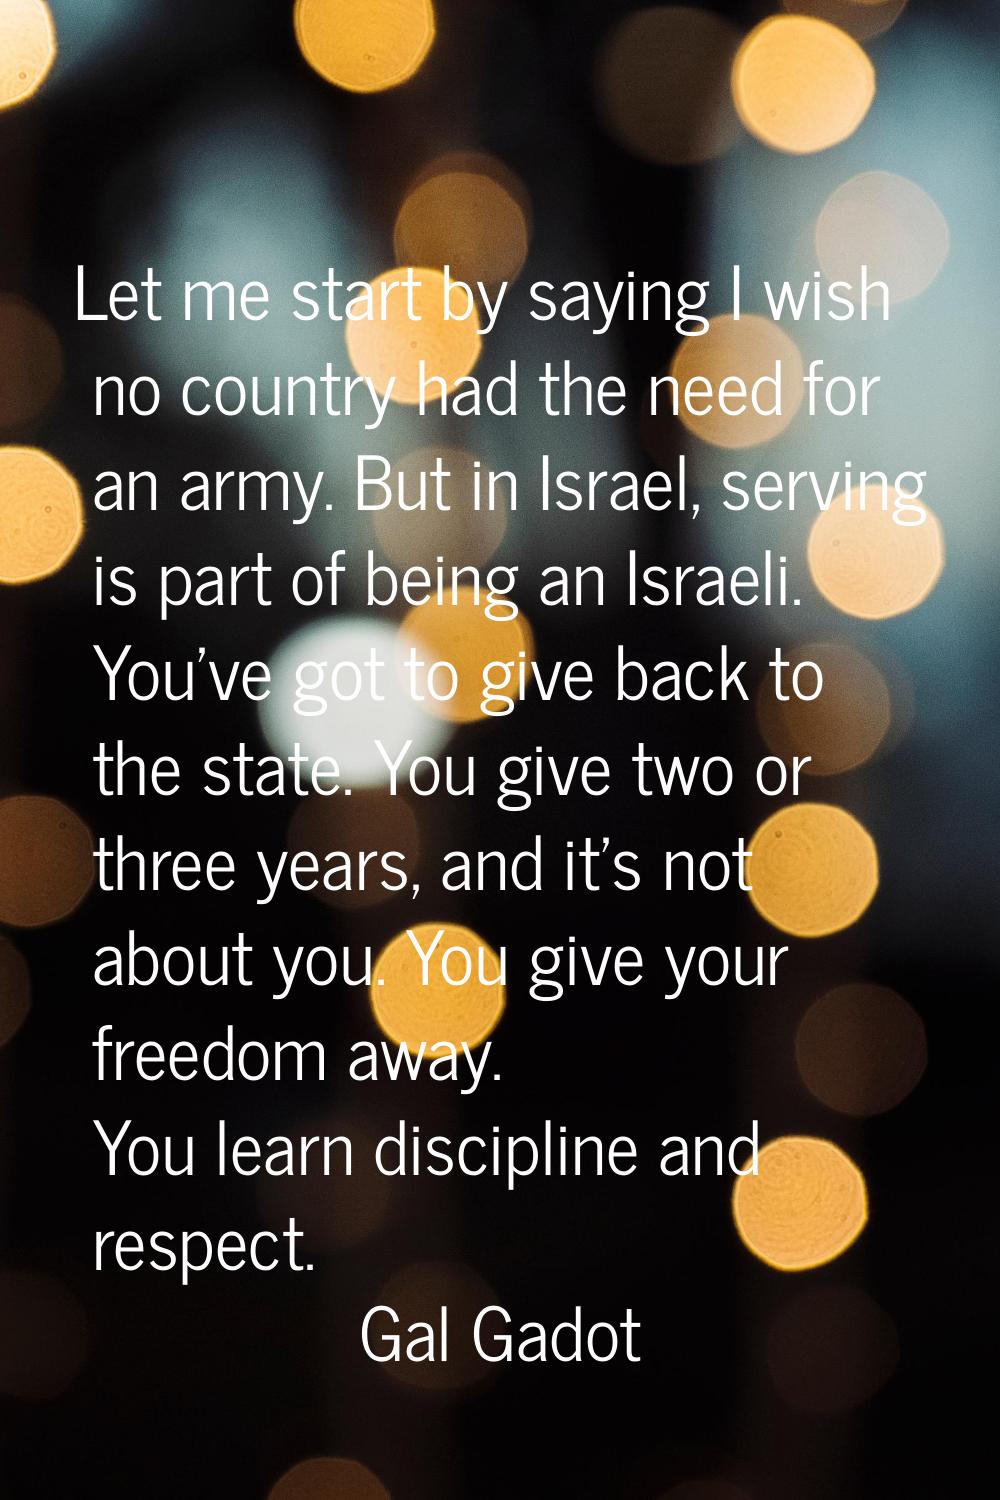 Let me start by saying I wish no country had the need for an army. But in Israel, serving is part o